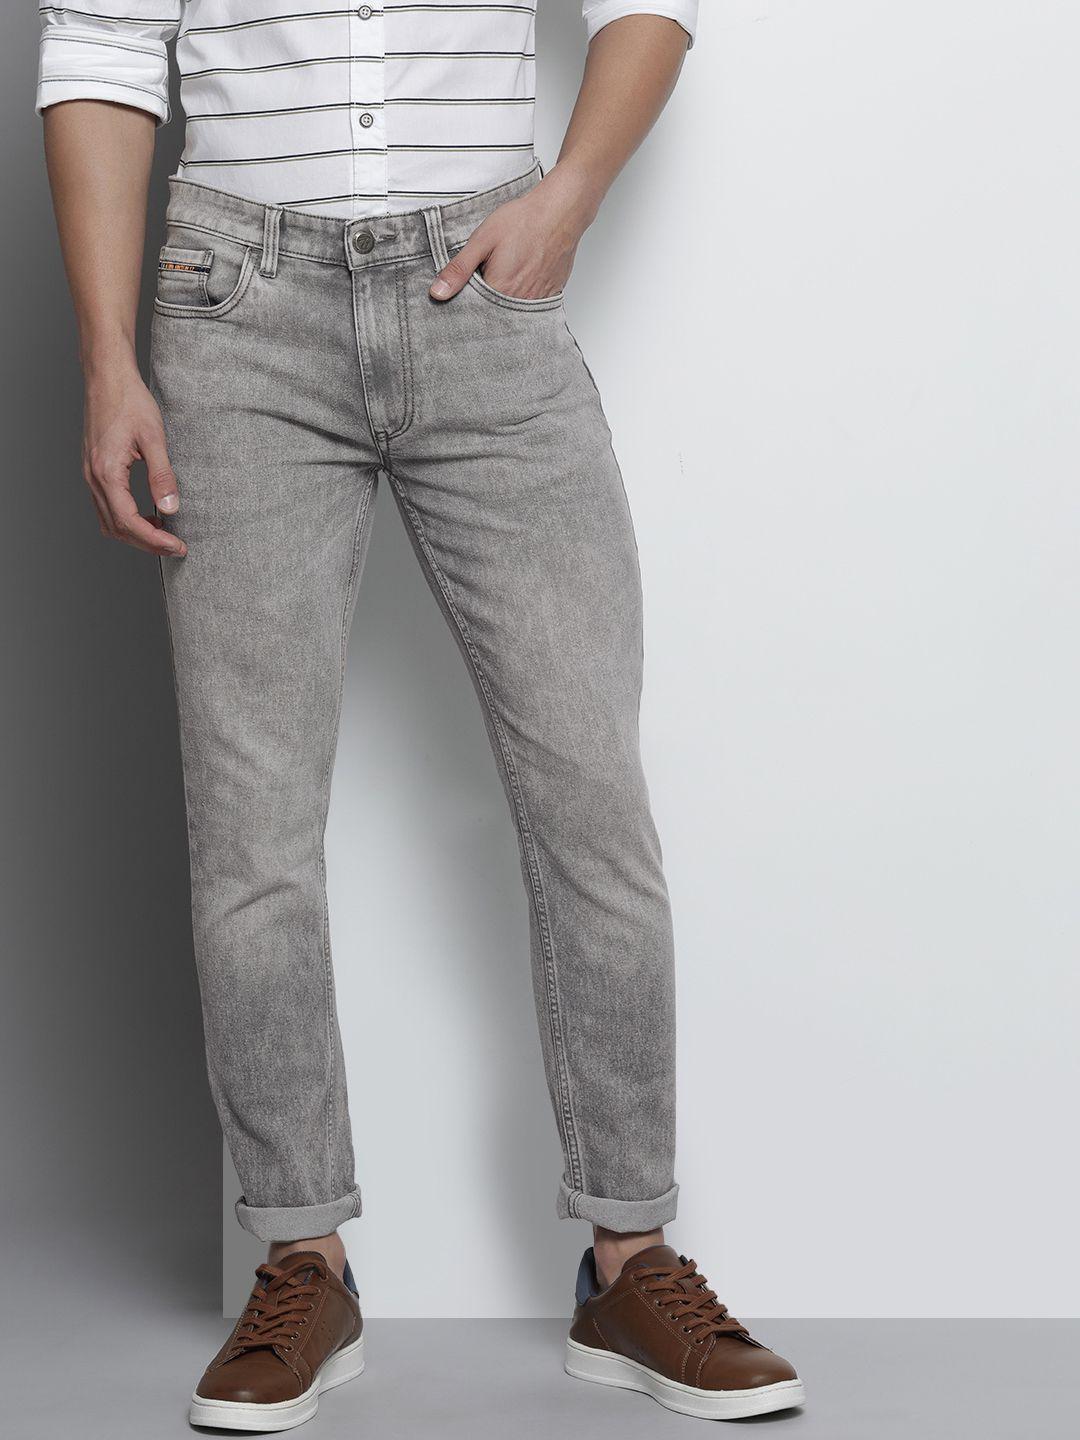 the-indian-garage-co-men-grey-slim-fit-light-fade-stretchable-jeans